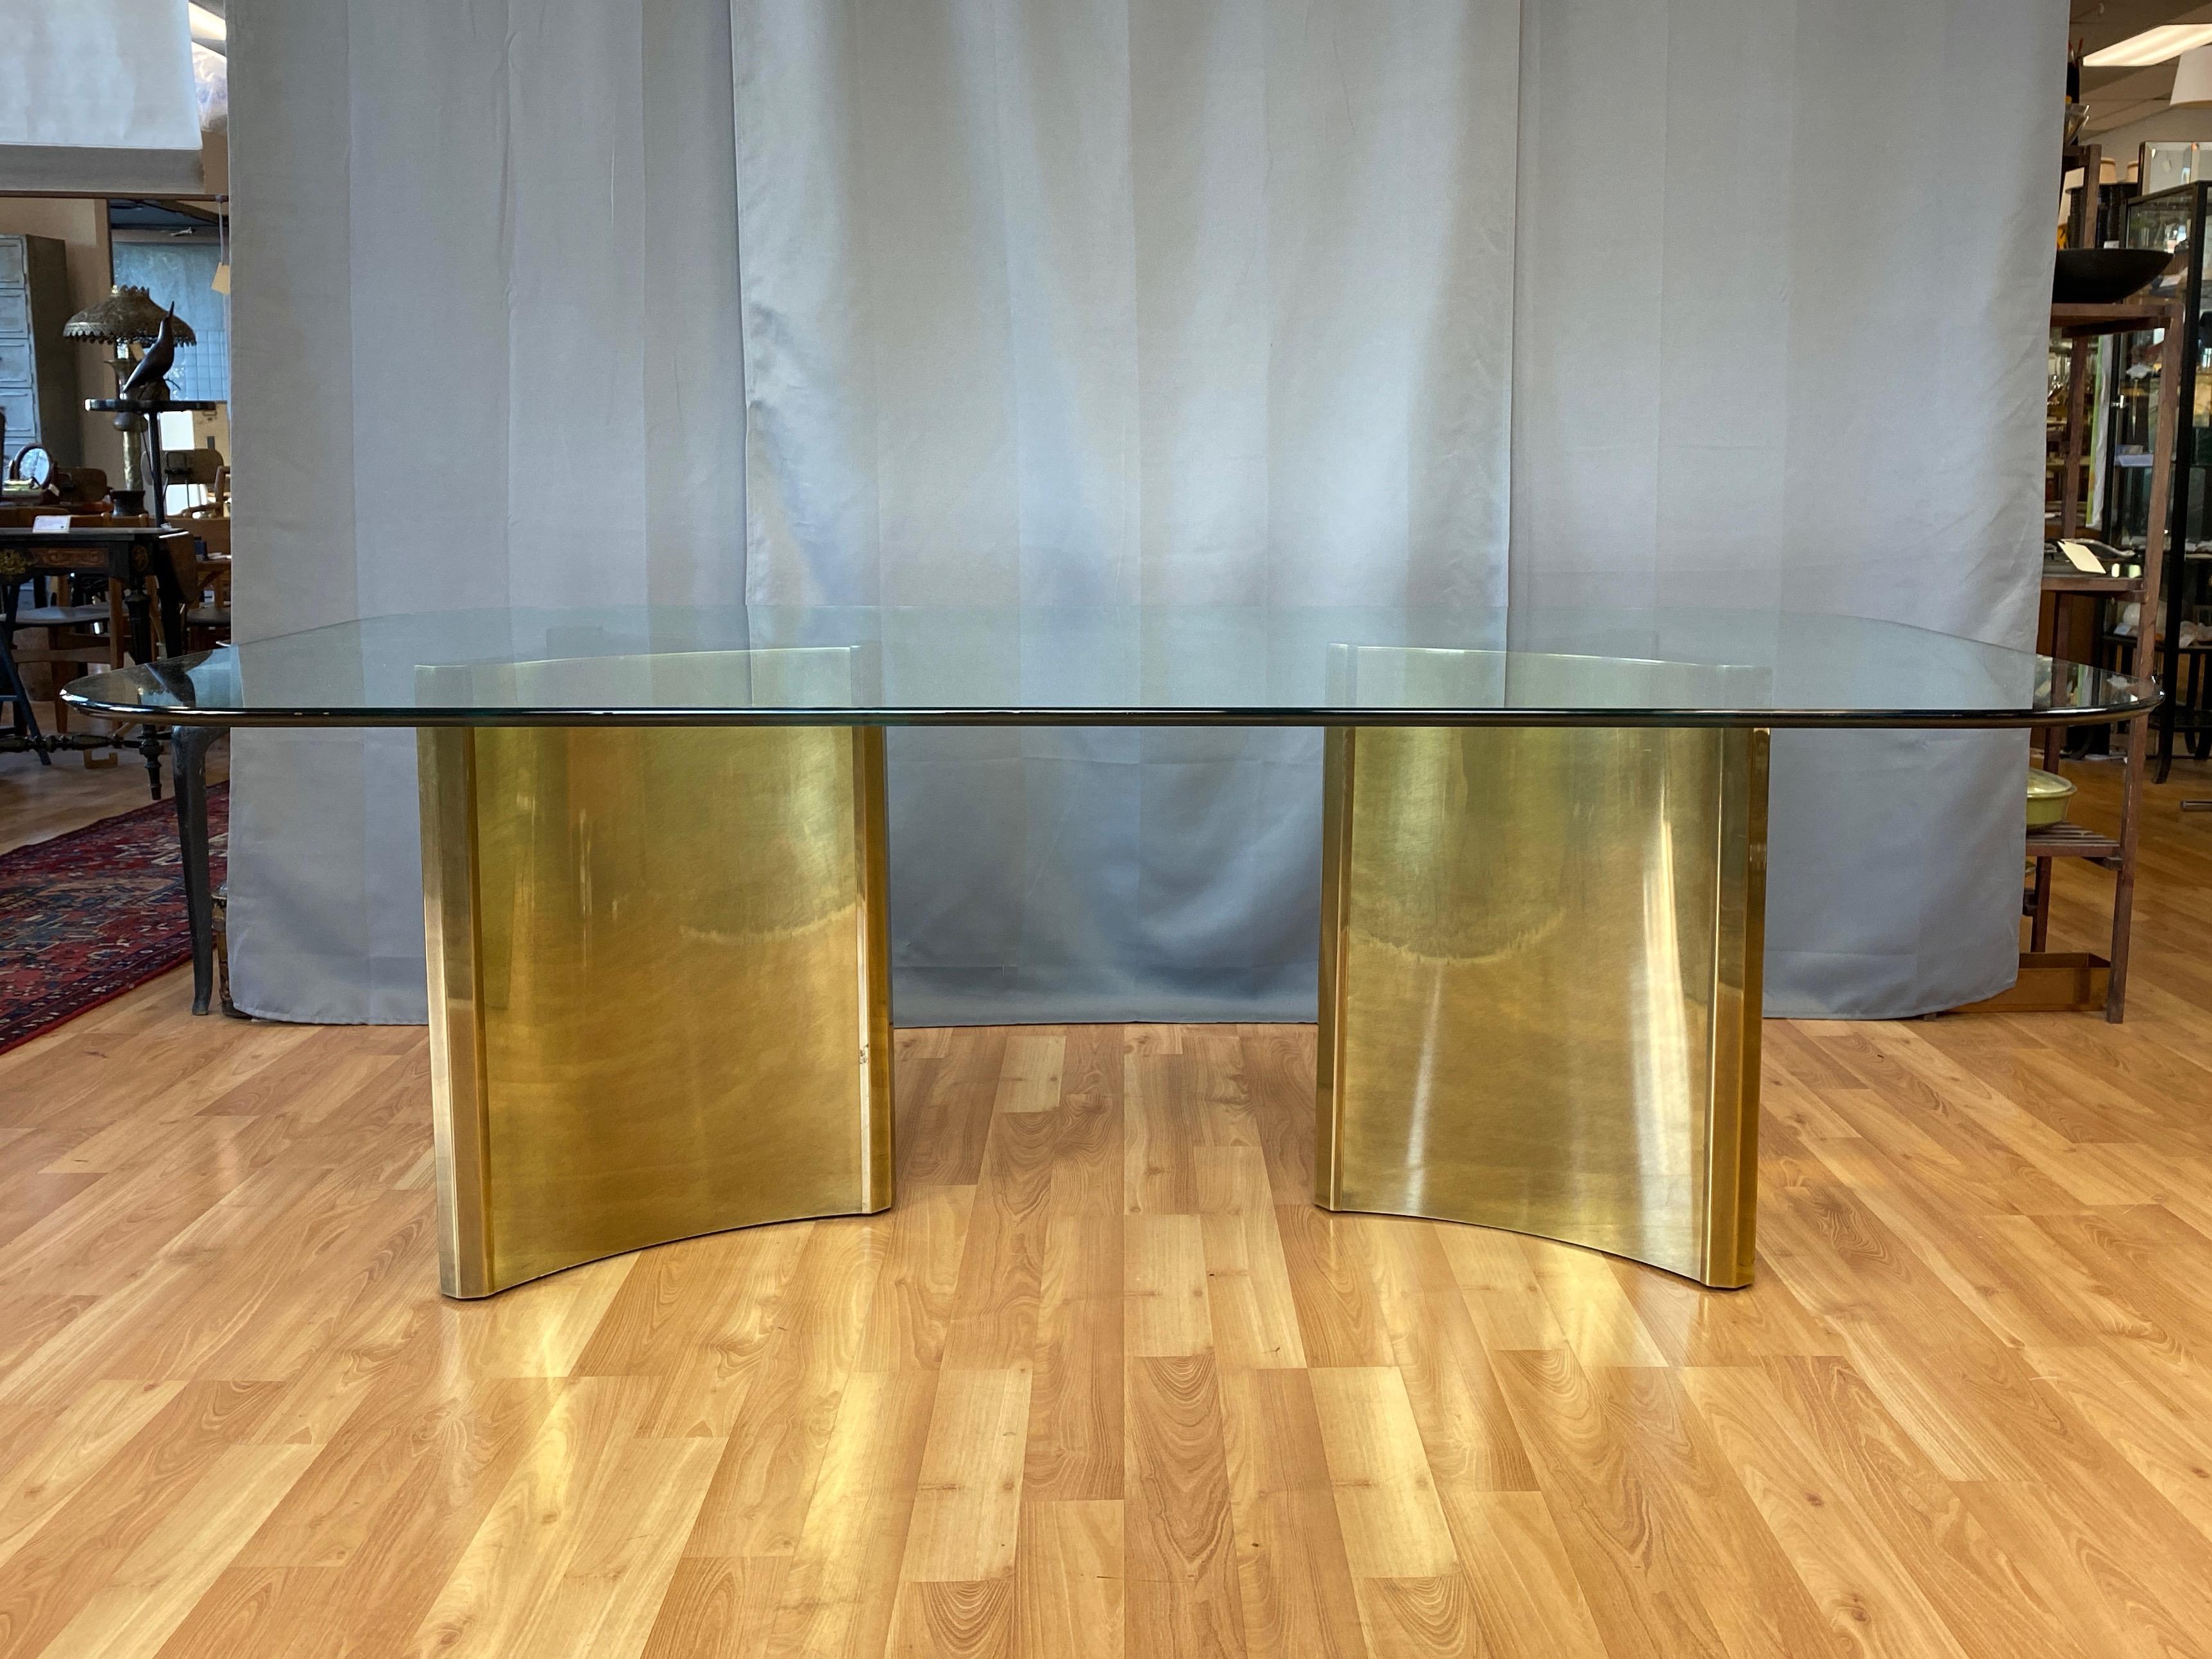 A monumental and rare Mastercraft Trilobi model 1972 brass pedestal base dining table with original glass top.

Striking pair of parabolic triangular pedestals are equal parts architectural and sculptural, with a chic yet commanding presence.